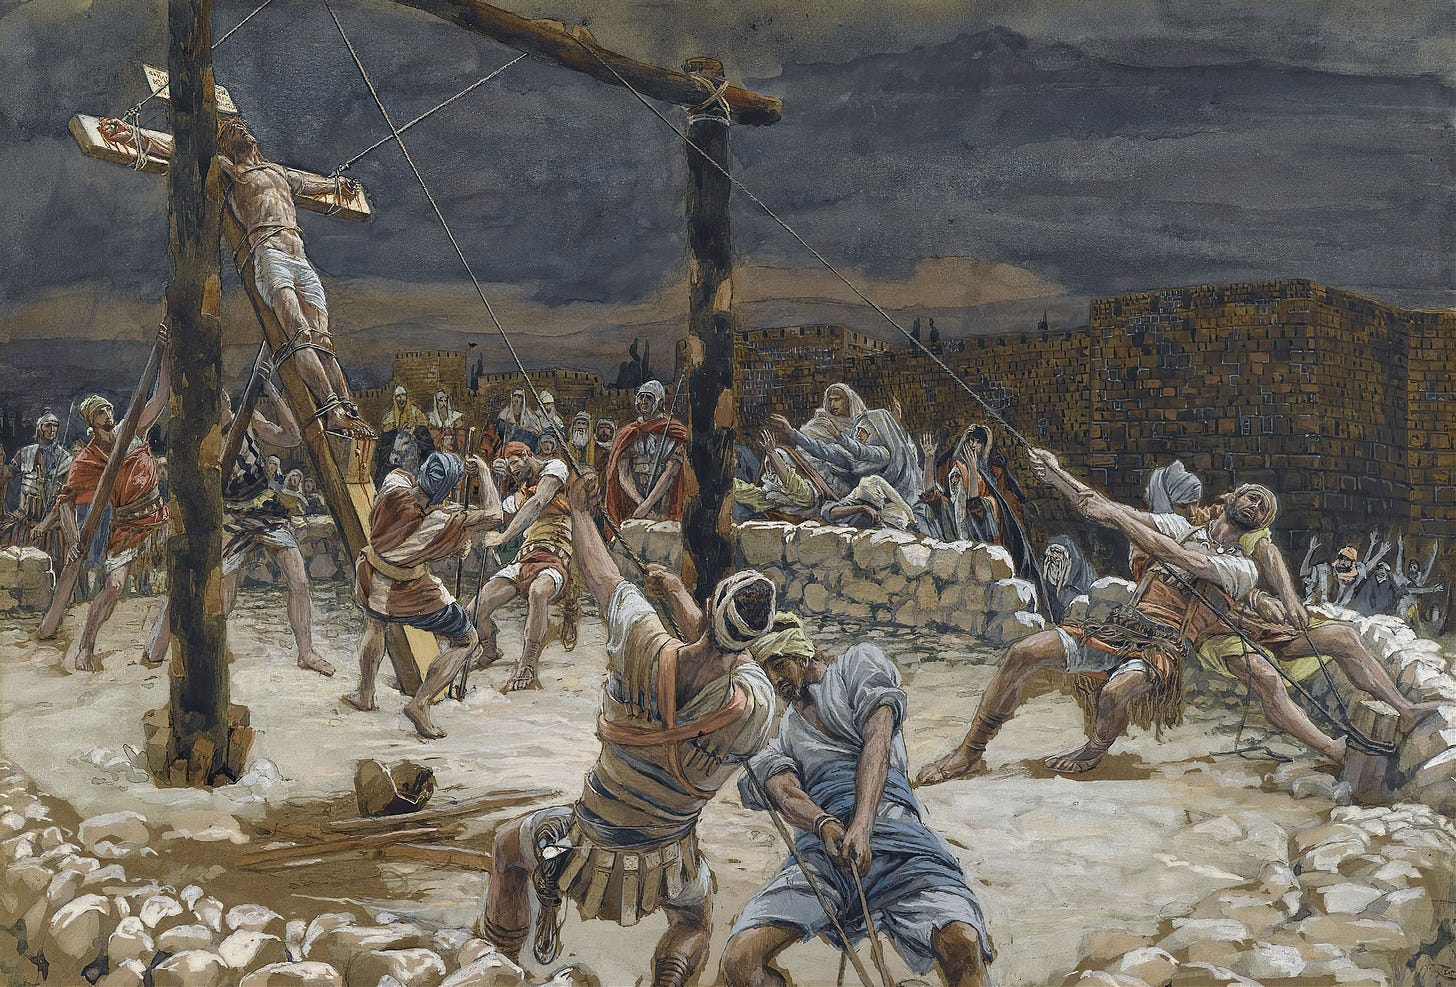 The Raising of the Cross (1886-1894) by James Tissot (French, 1836-1902)